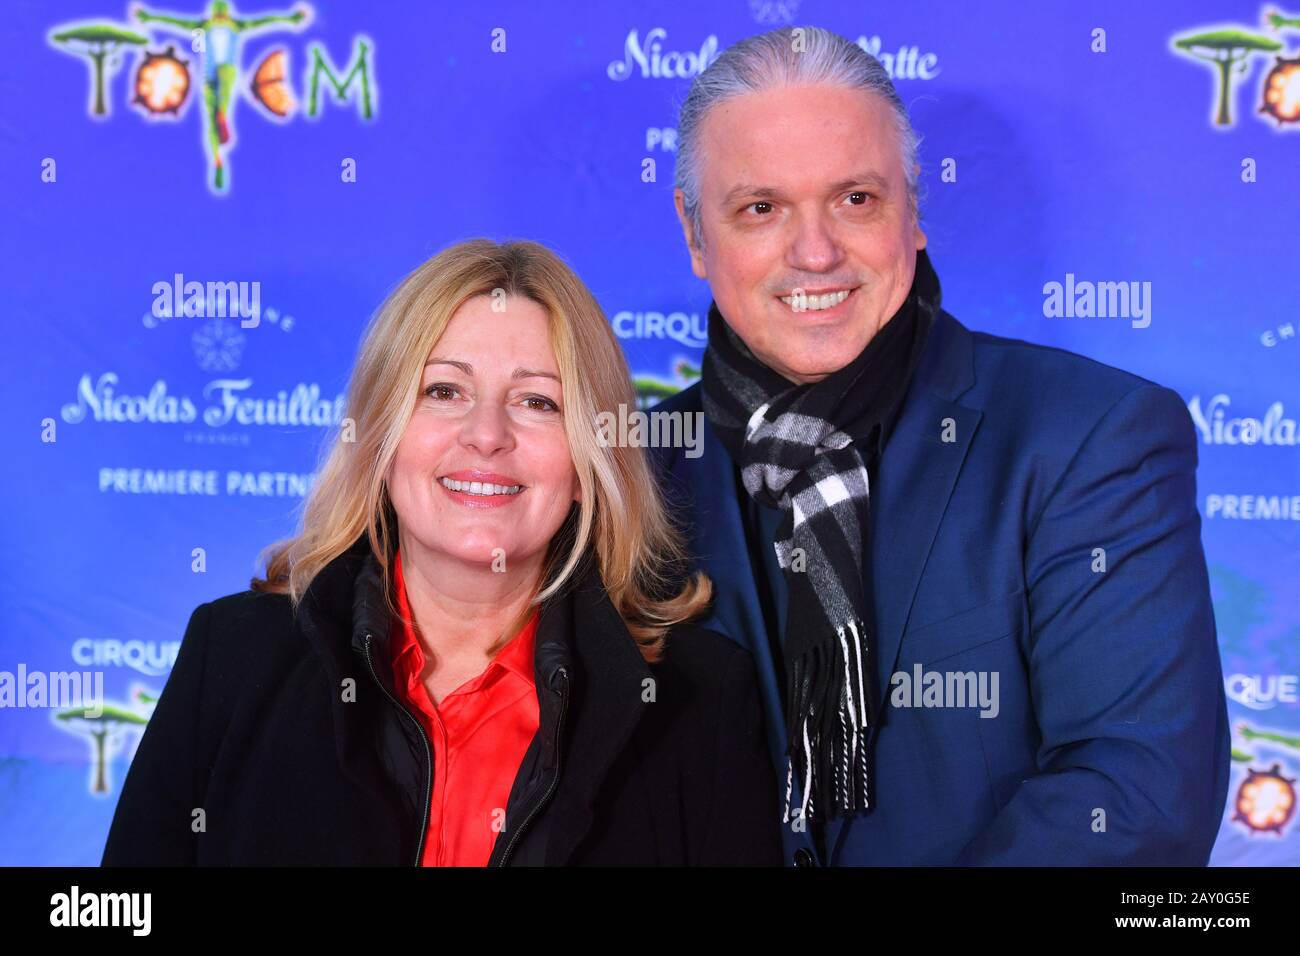 Karin THALER (actress), with husband Milos Malesevic. Red carpet, red  carpet, arrival. TOTEM by Cirque du Soleil, on February 13th, 2020 in  Munich, | usage worldwide Stock Photo - Alamy